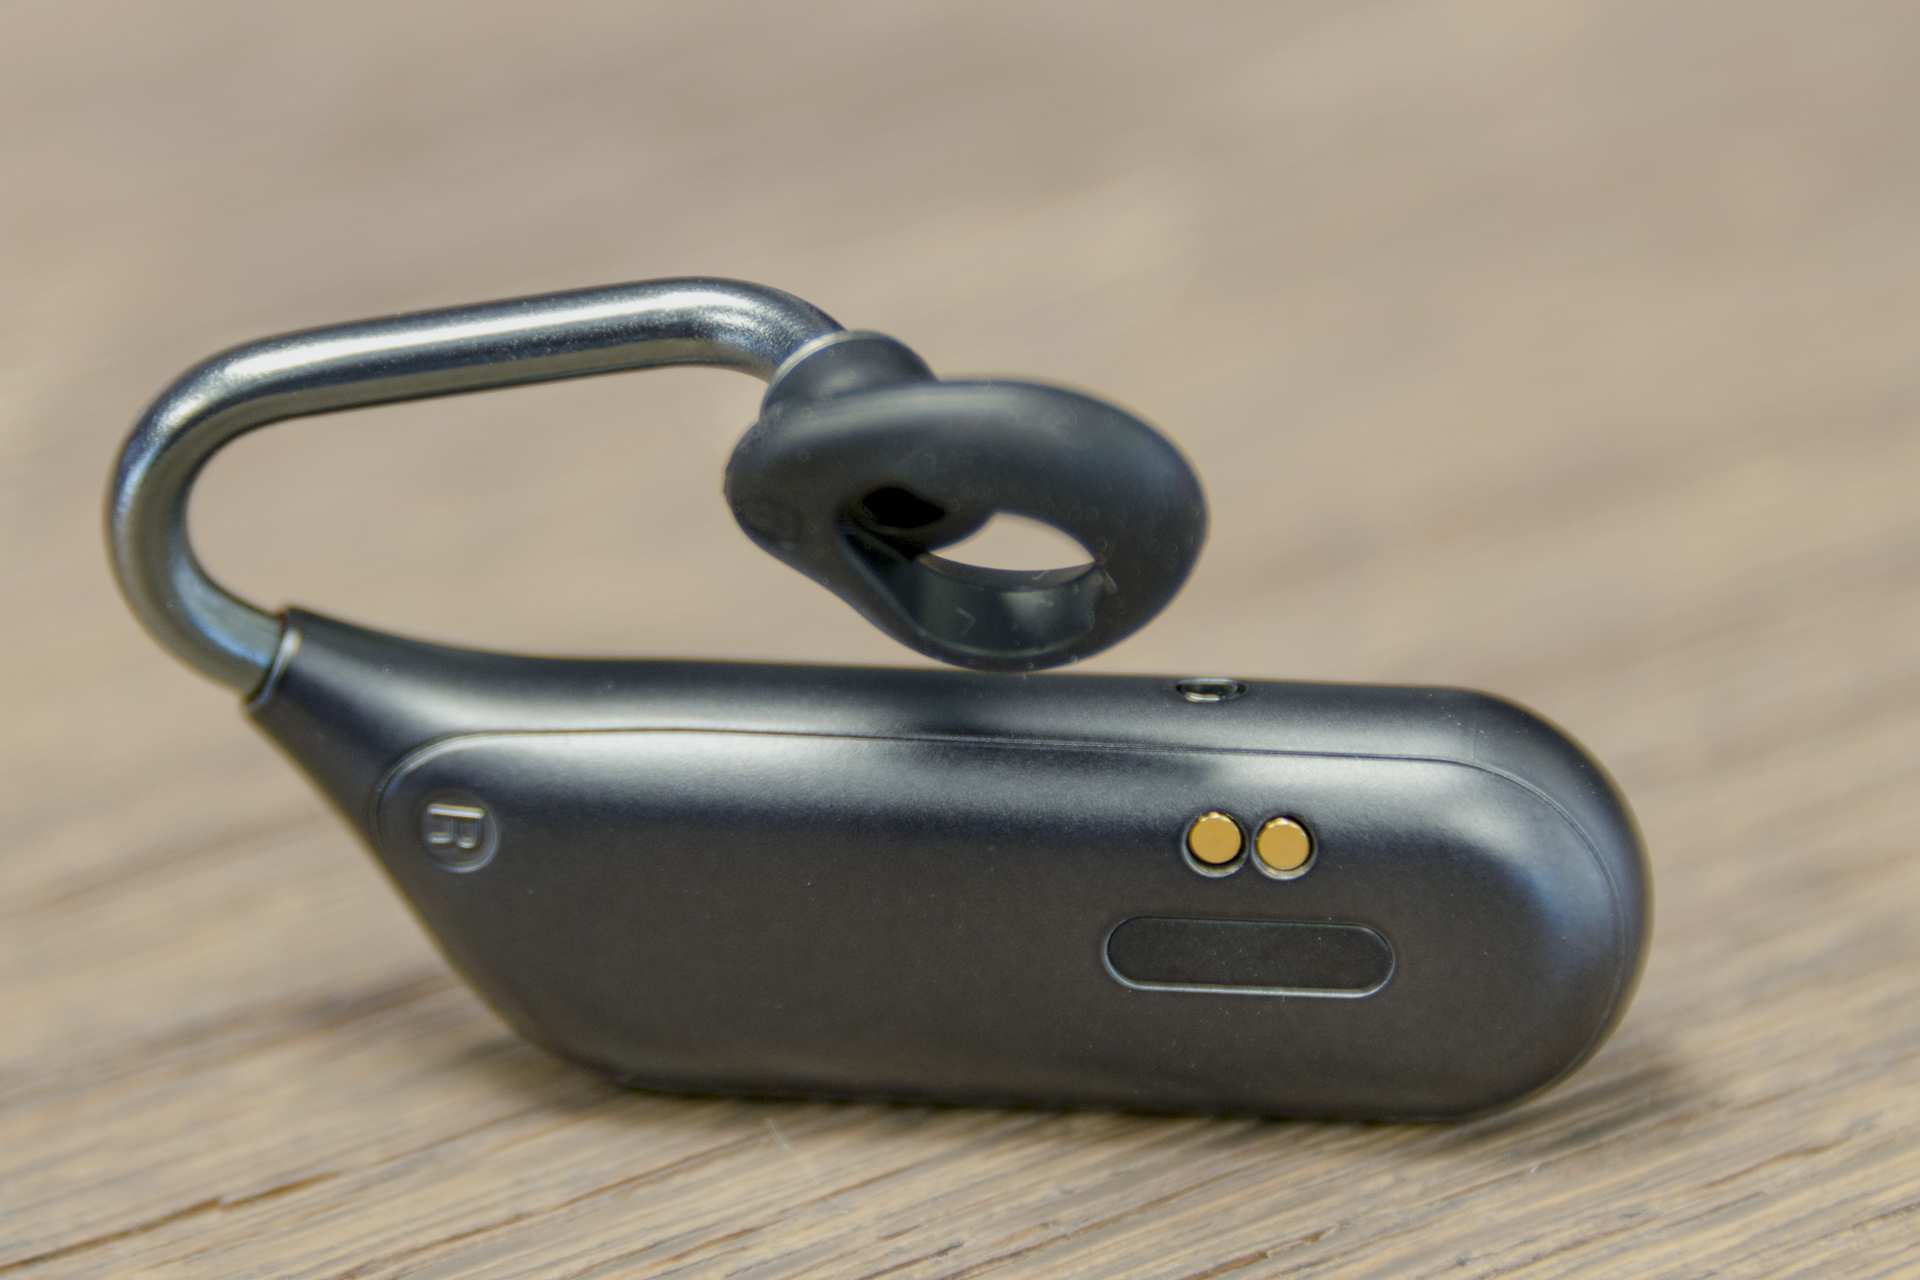 Sony Xperia Ear Duo Review   Digital Trends